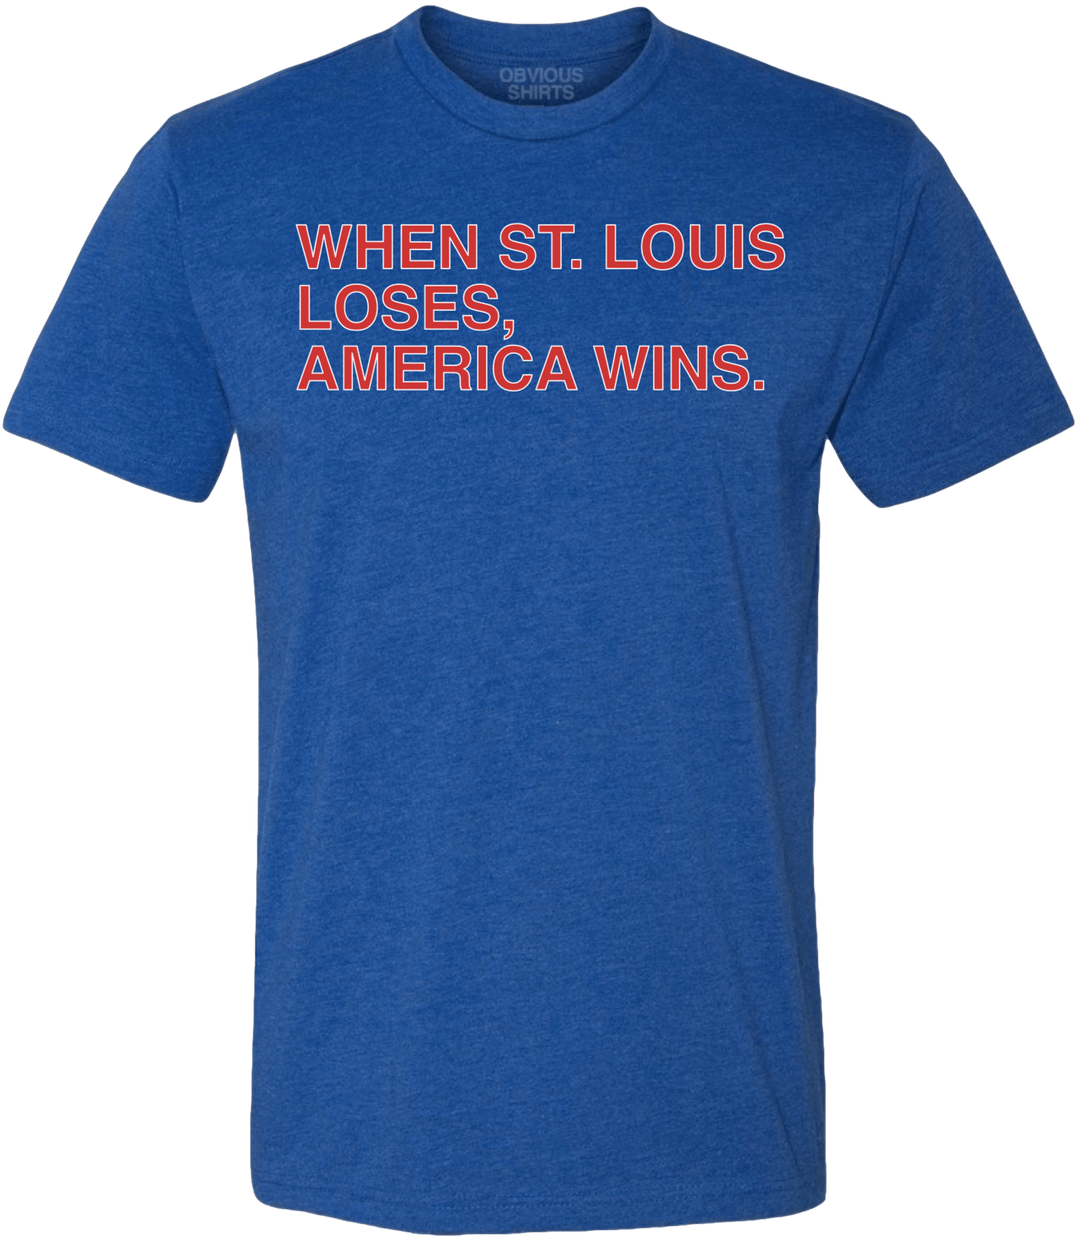 WHEN ST. LOUIS LOSES, AMERICA WINS. - OBVIOUS SHIRTS